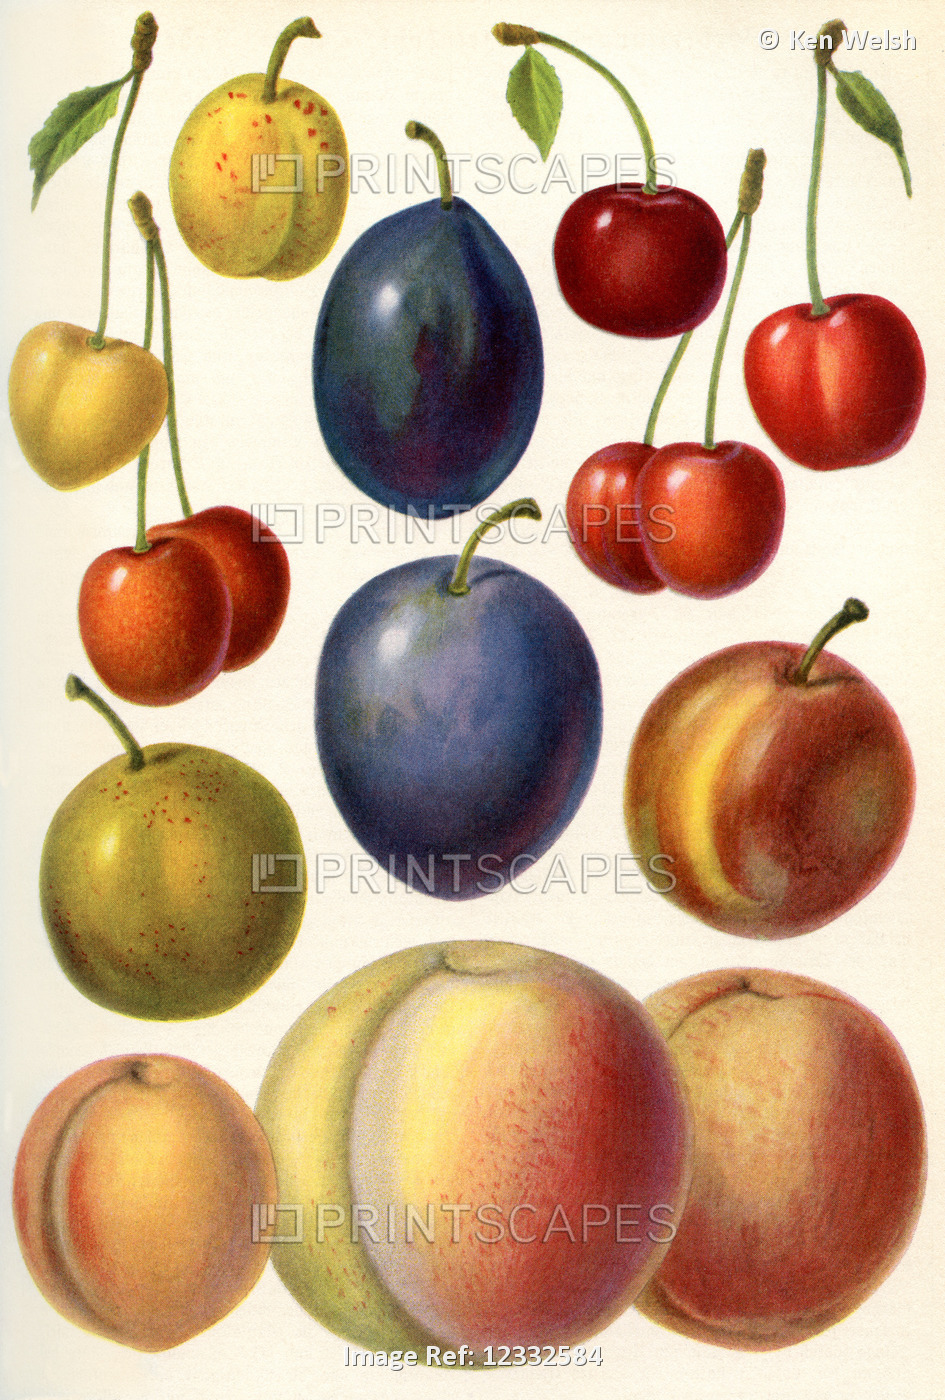 Stone fruit or drupes.  From Meyers Lexicon, published 1927.